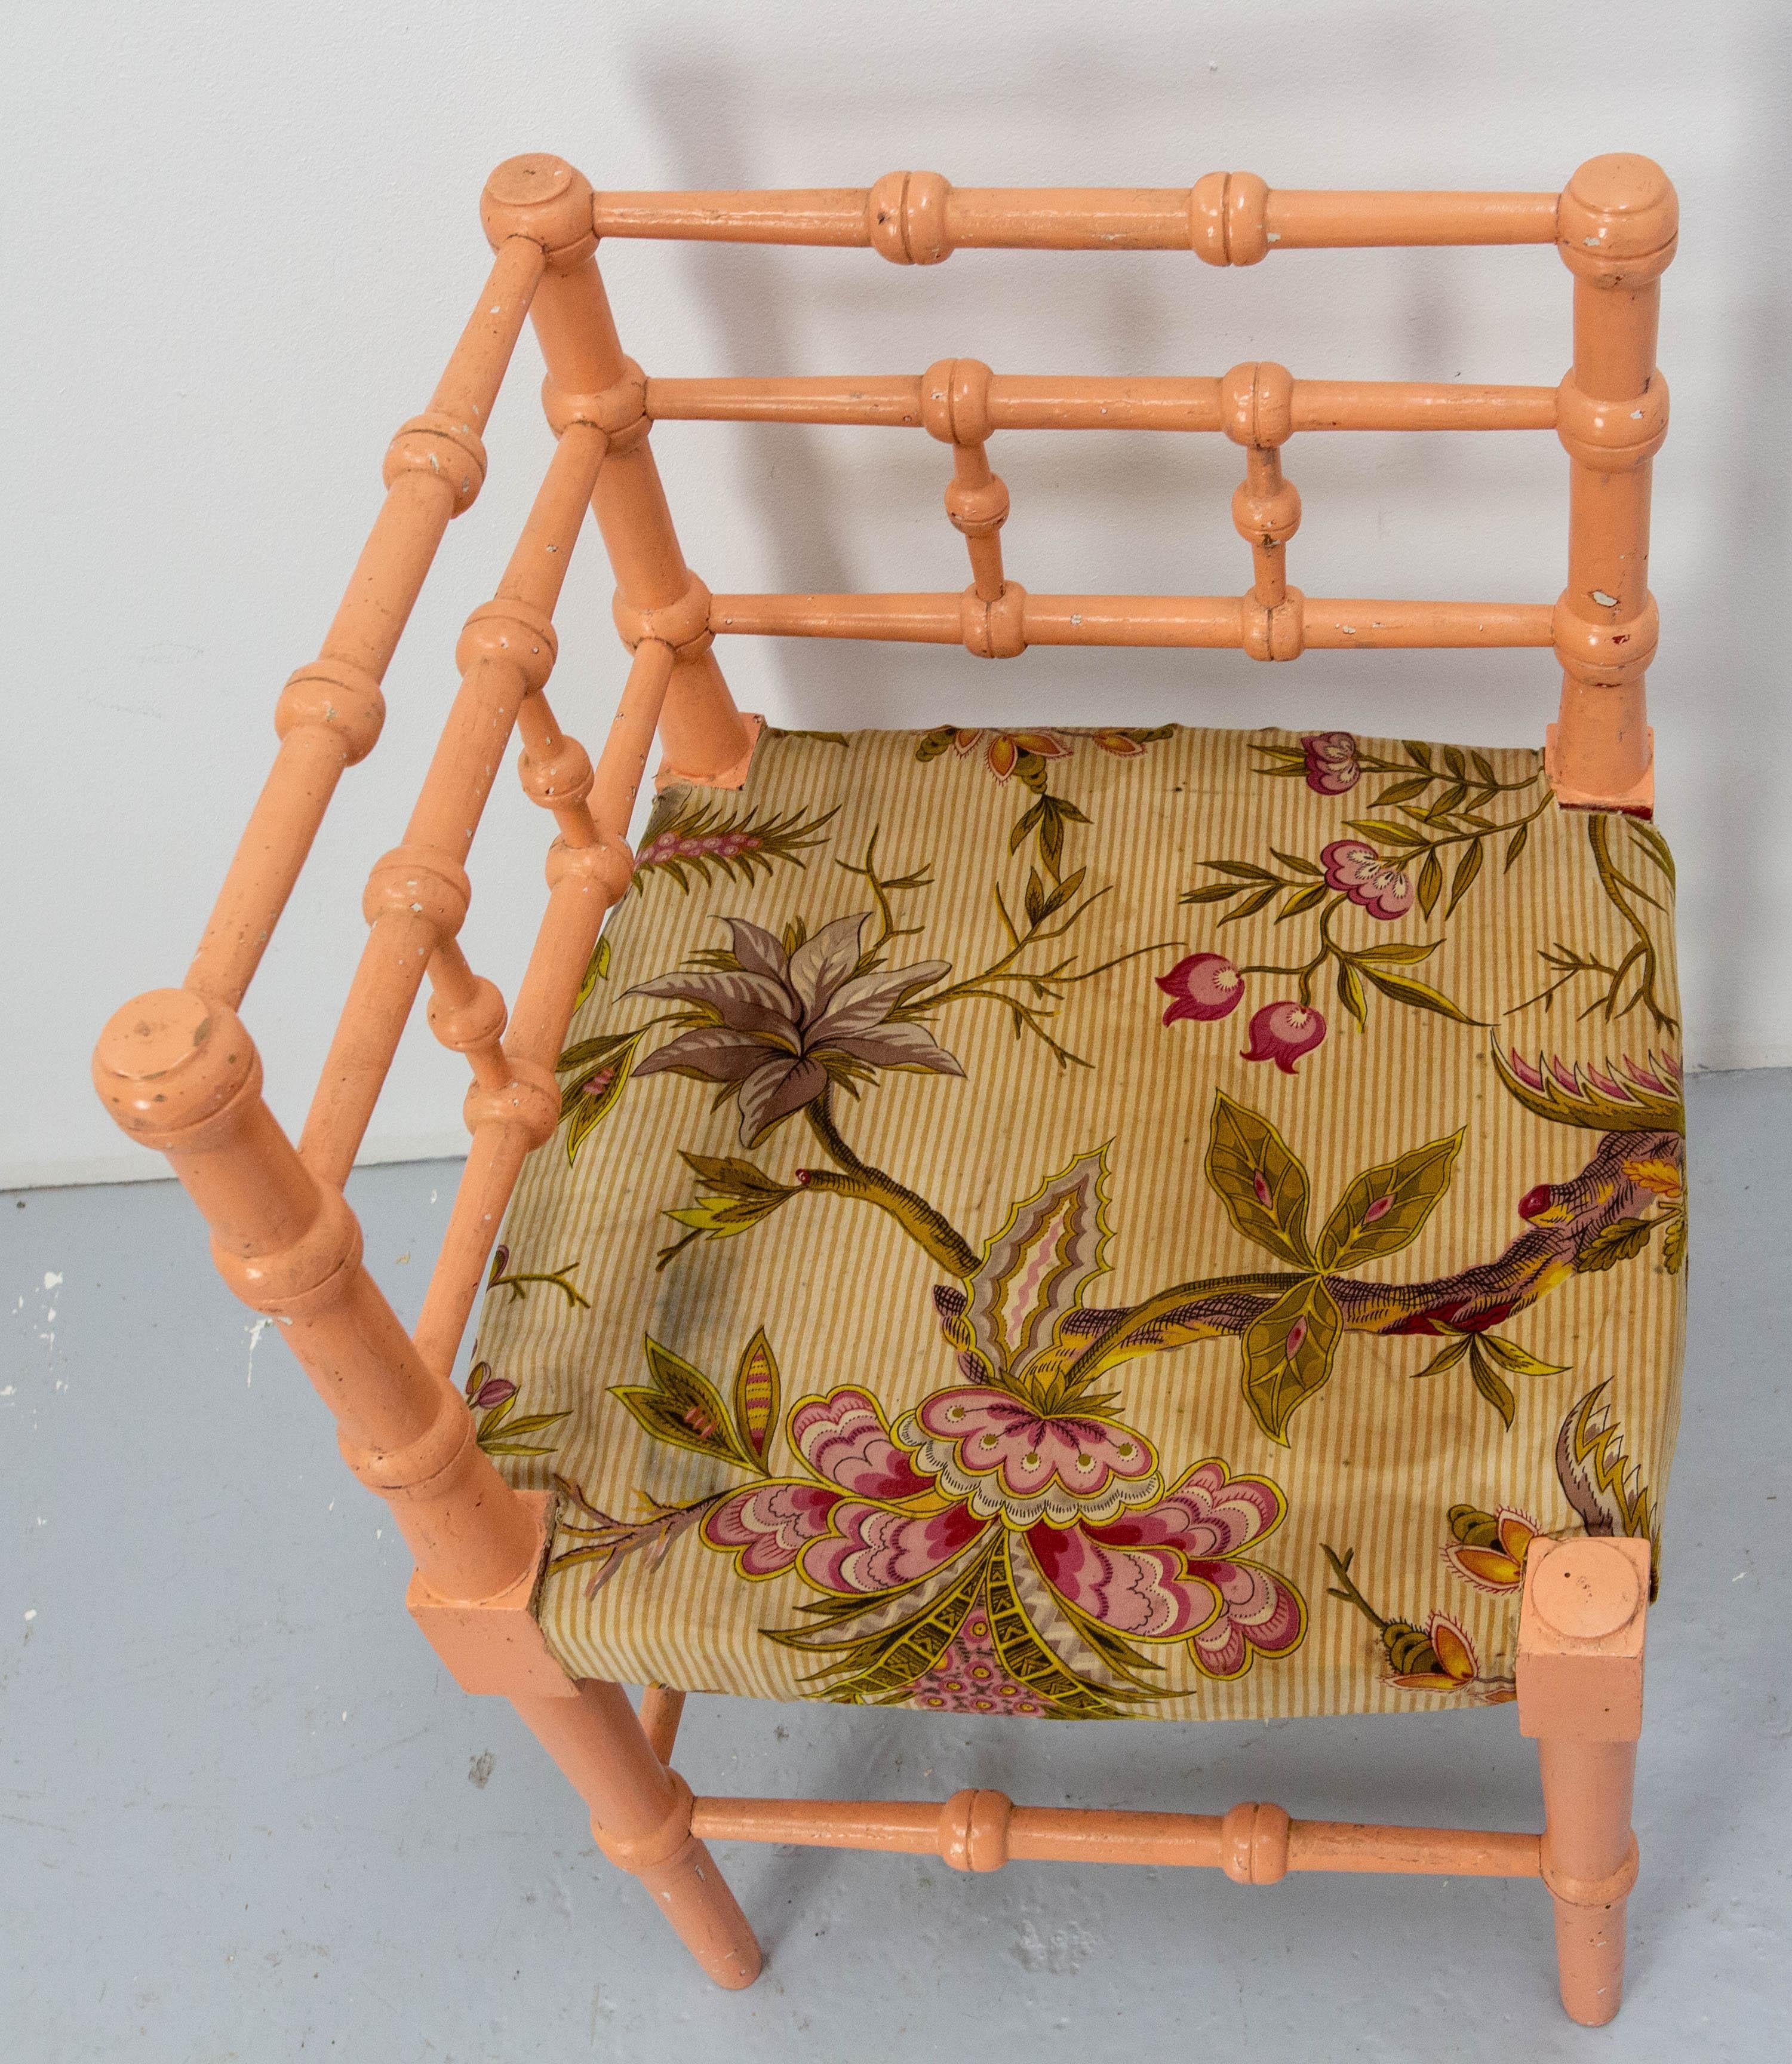 Turned Corner Chair for Child Painted Wood & Fabric French, 19th Century For Sale 3